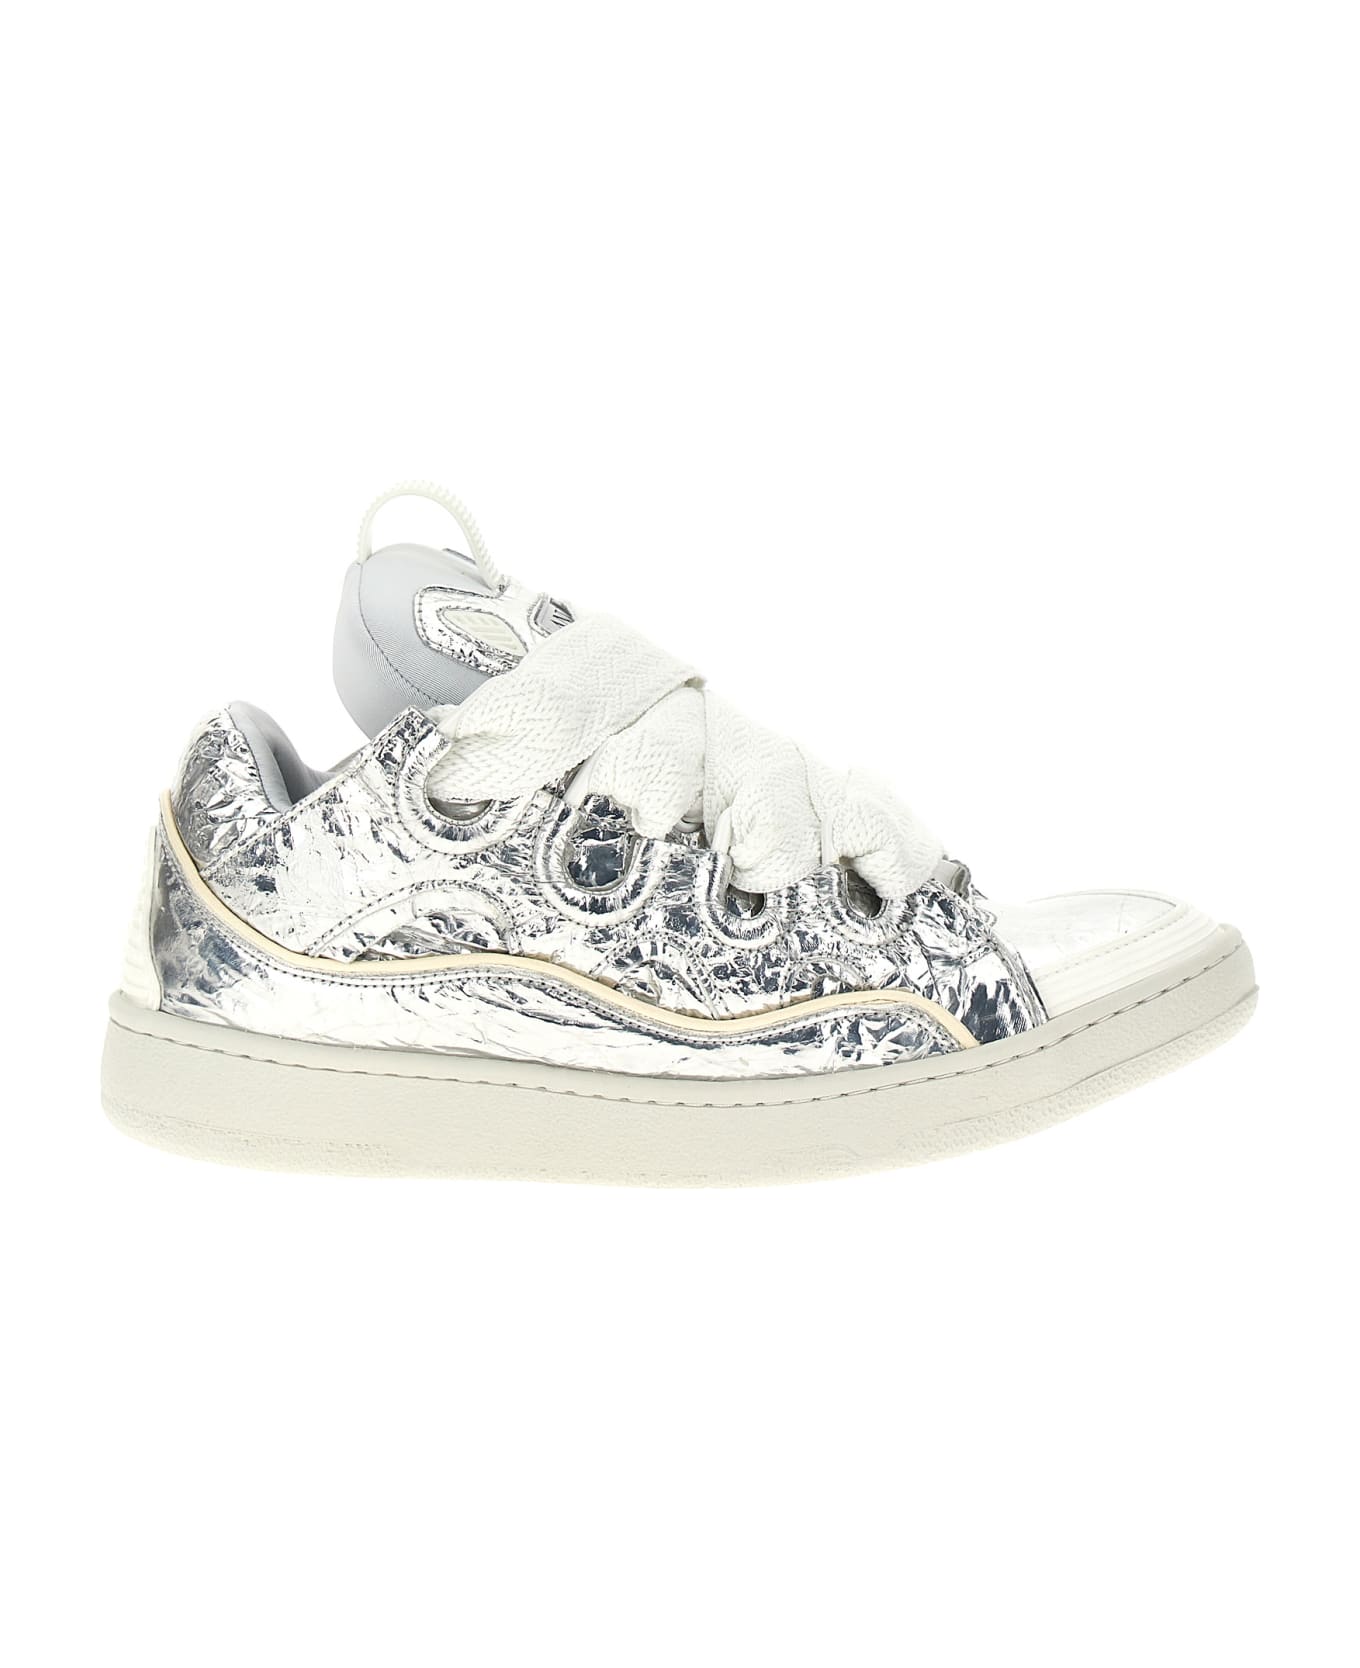 Lanvin 'curb' Sneakers - SILVER/WHITE スニーカー